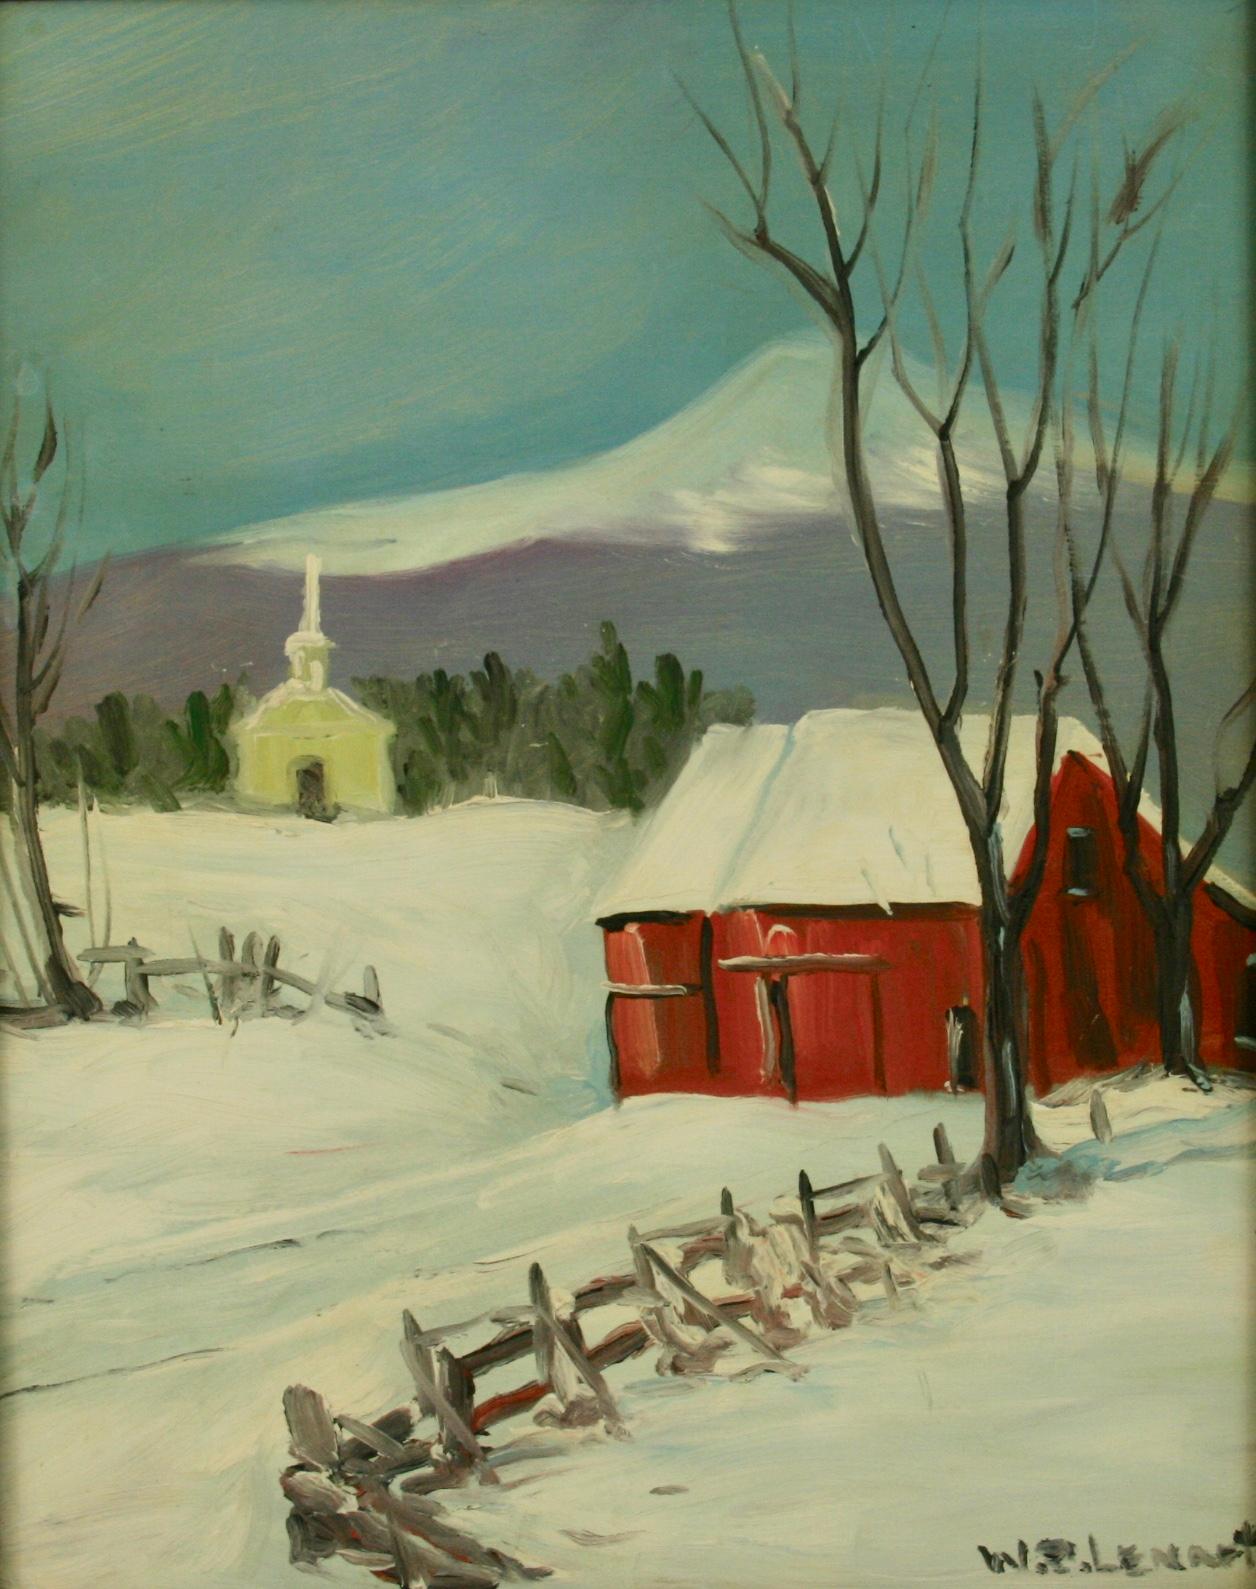 New England Winter Landscape 1940's - Painting by W.R.Lenart